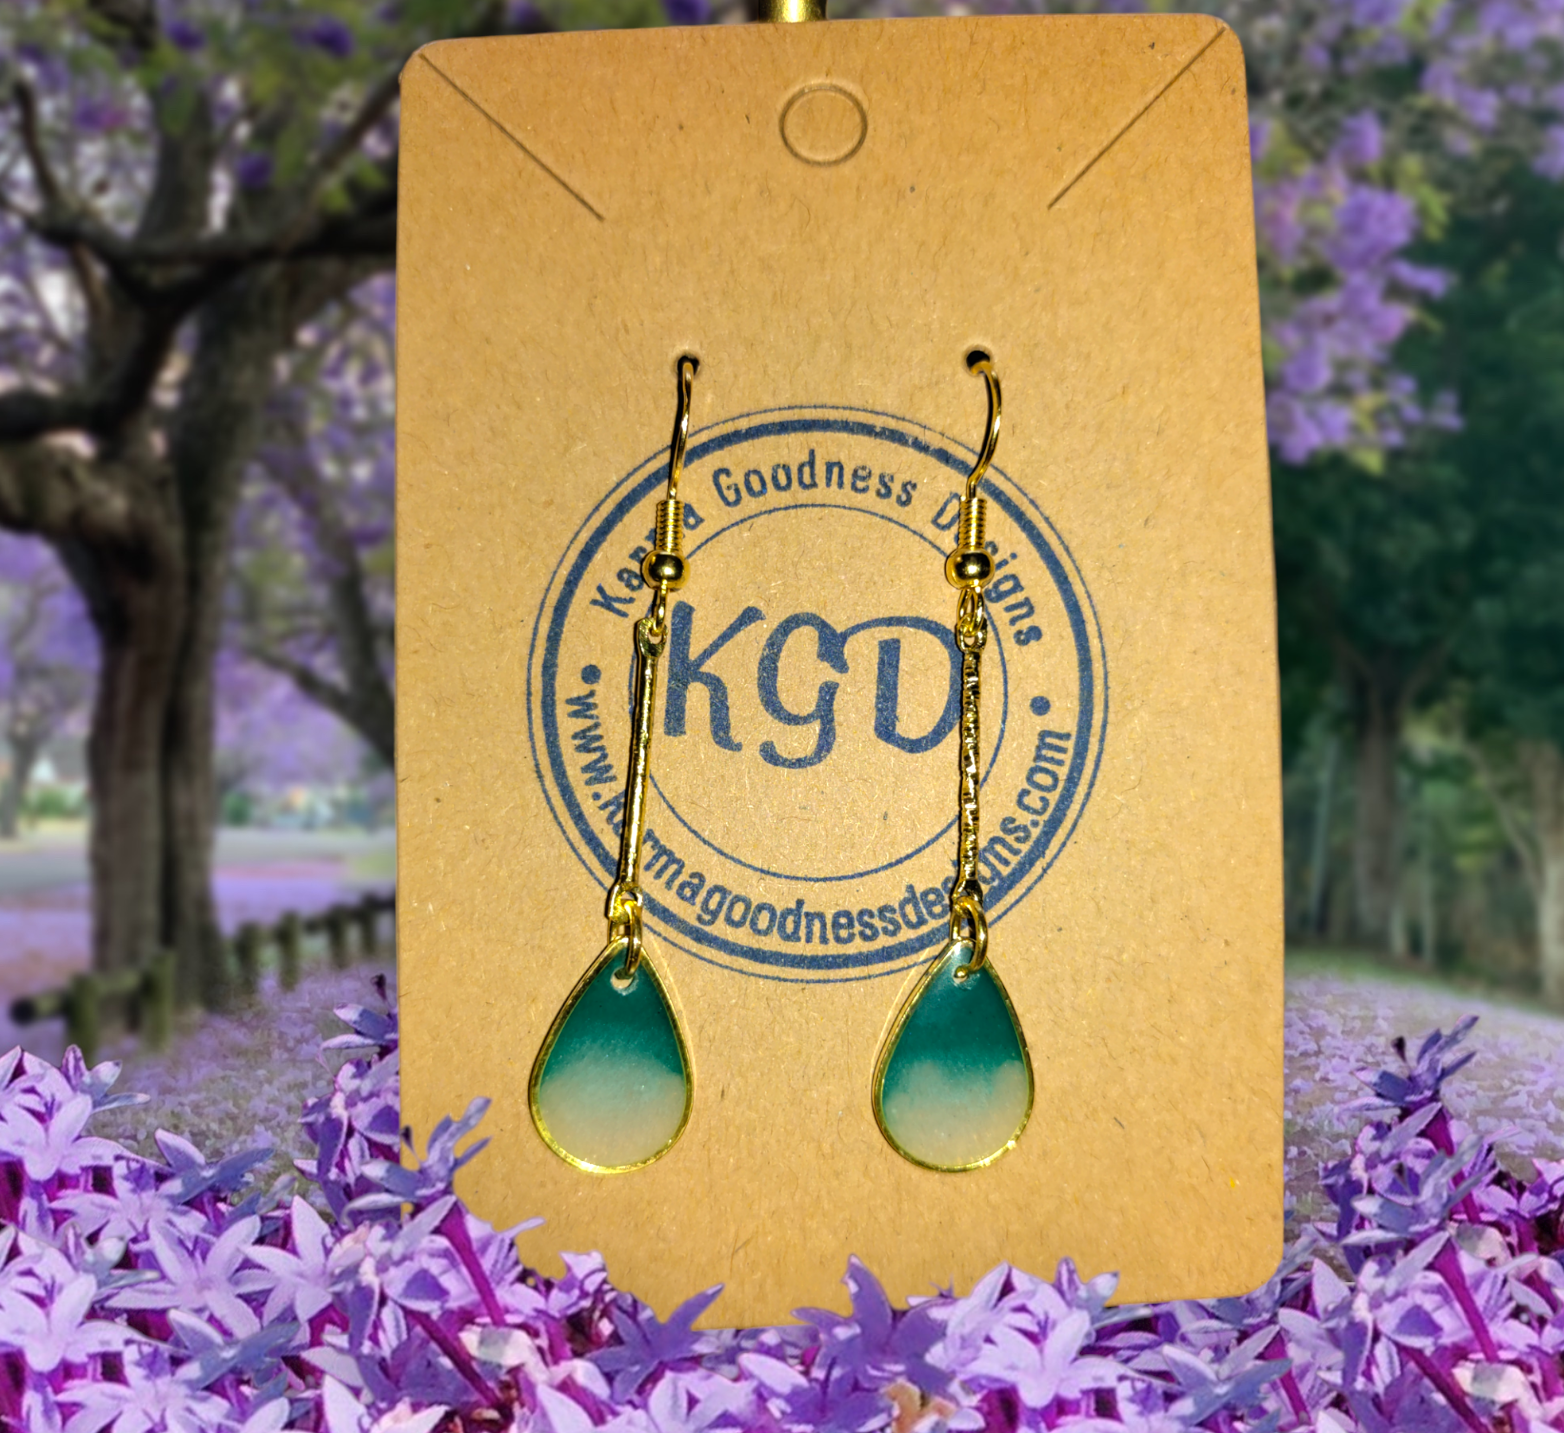 Gulf Sands Emerald Isle earrings from Karma Goodness Designs